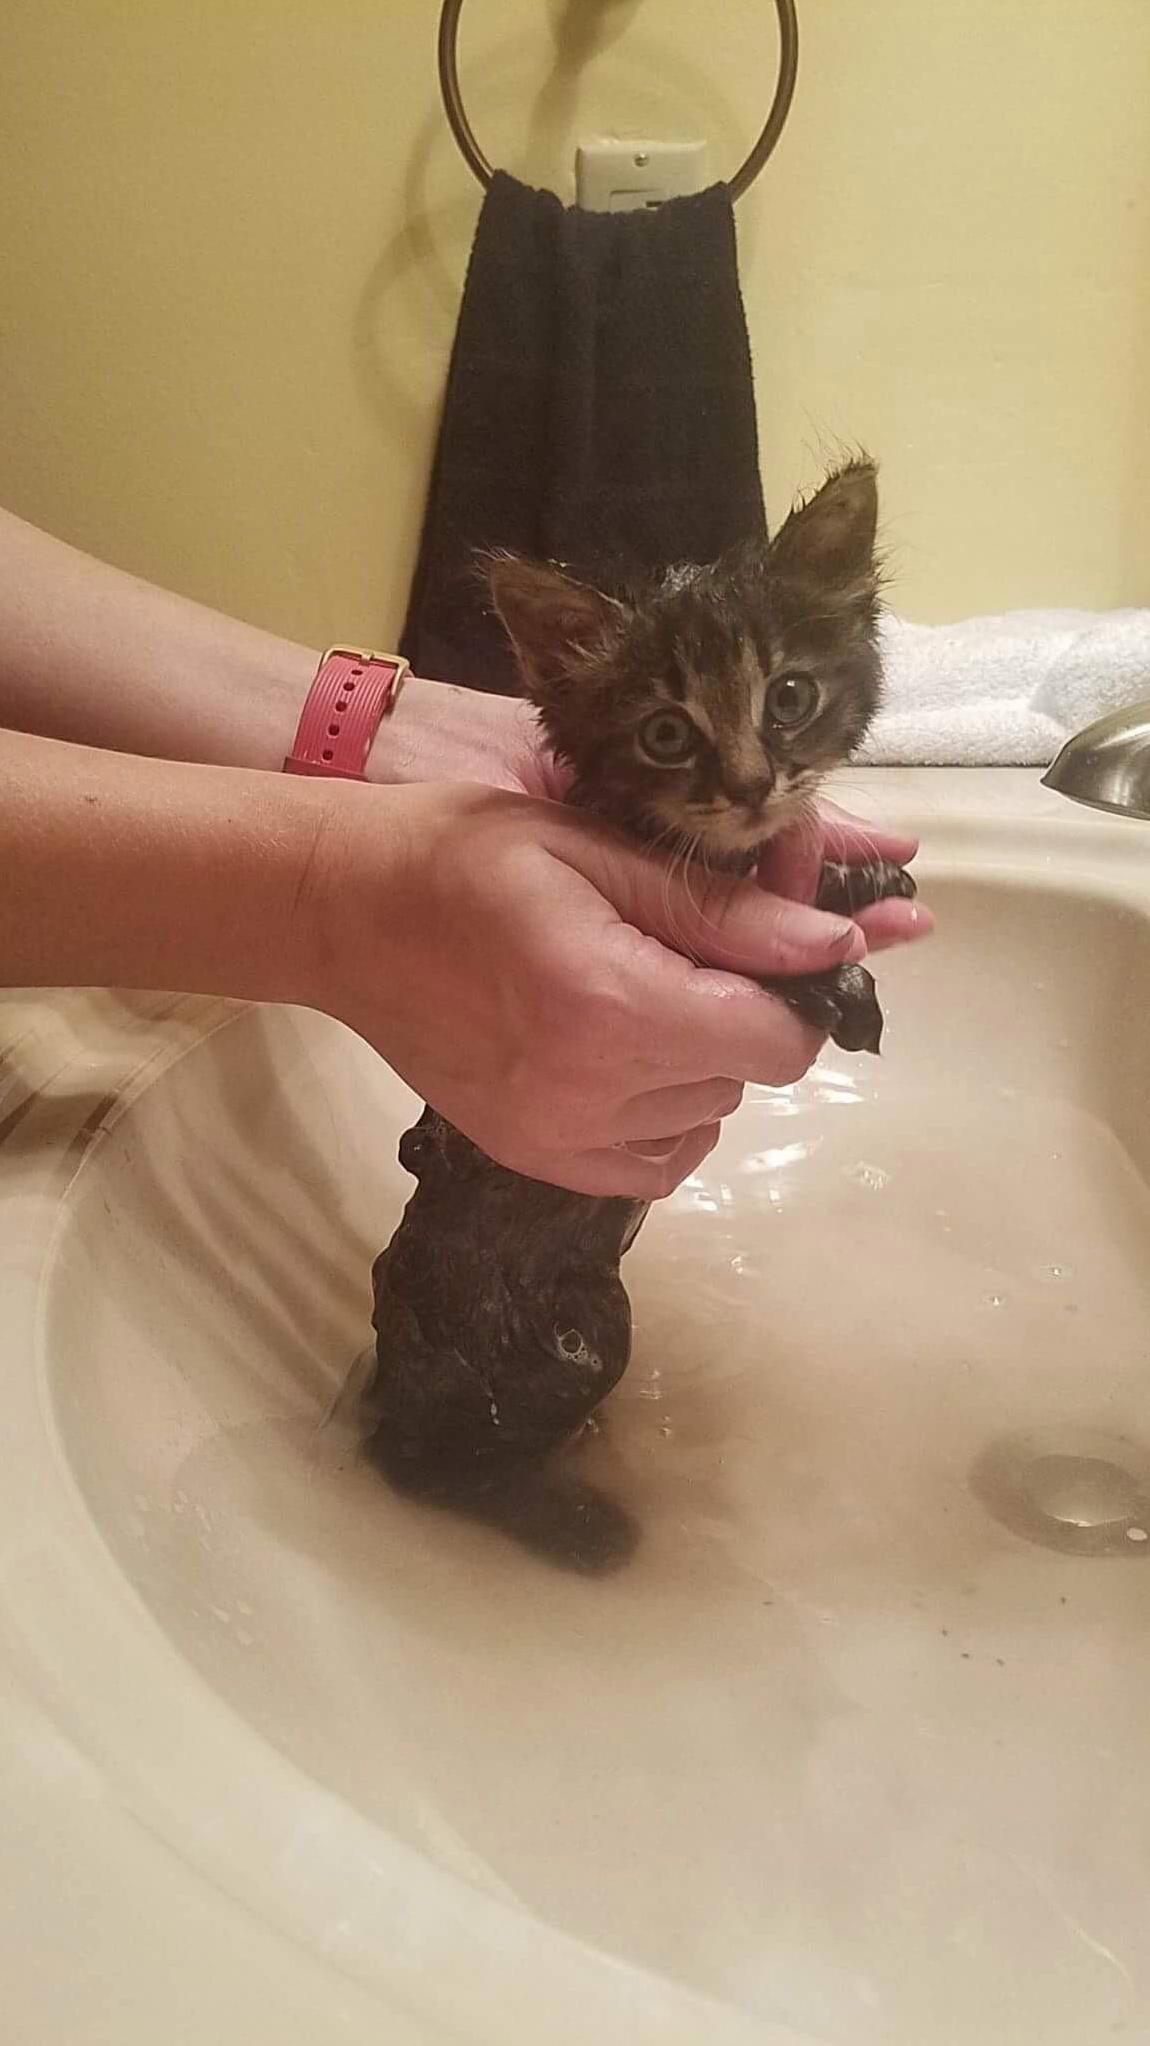 Tiny baby found right before storm